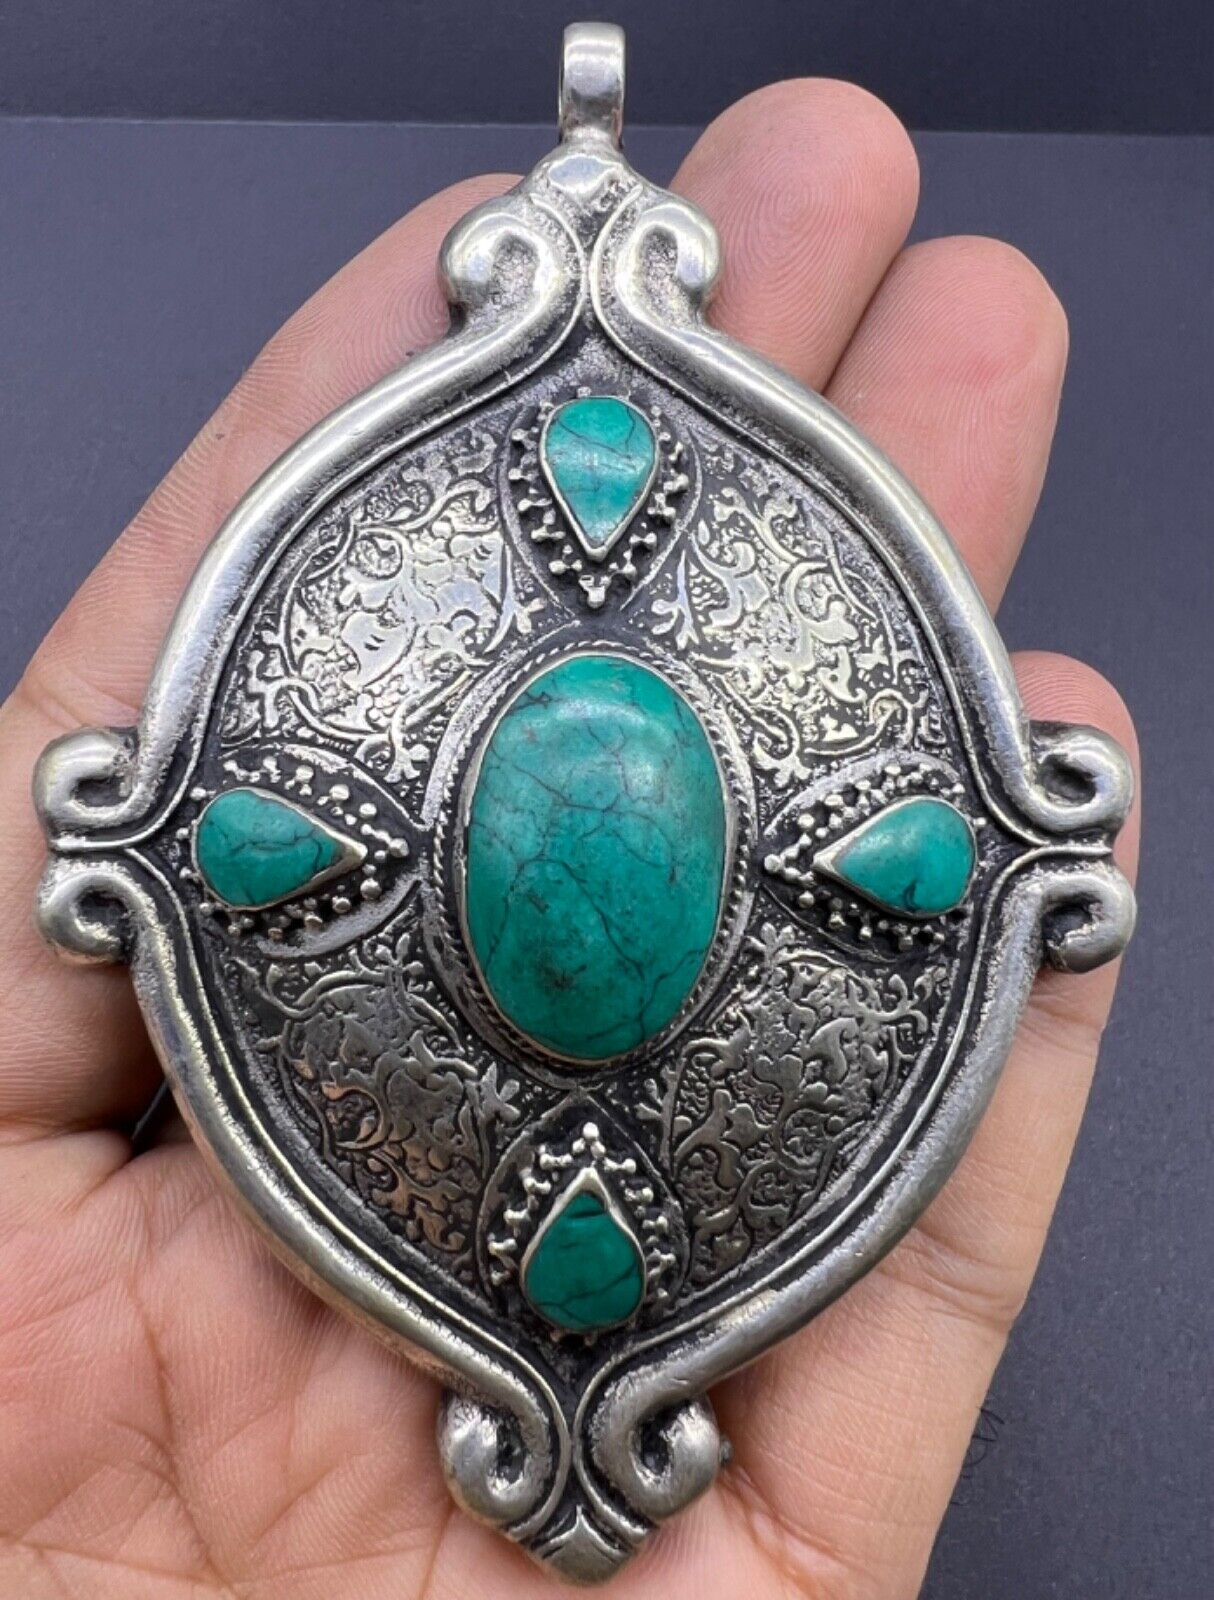 Old Rare Beautiful Afghan Central Asian Antiques Pendent Amulet With Craving